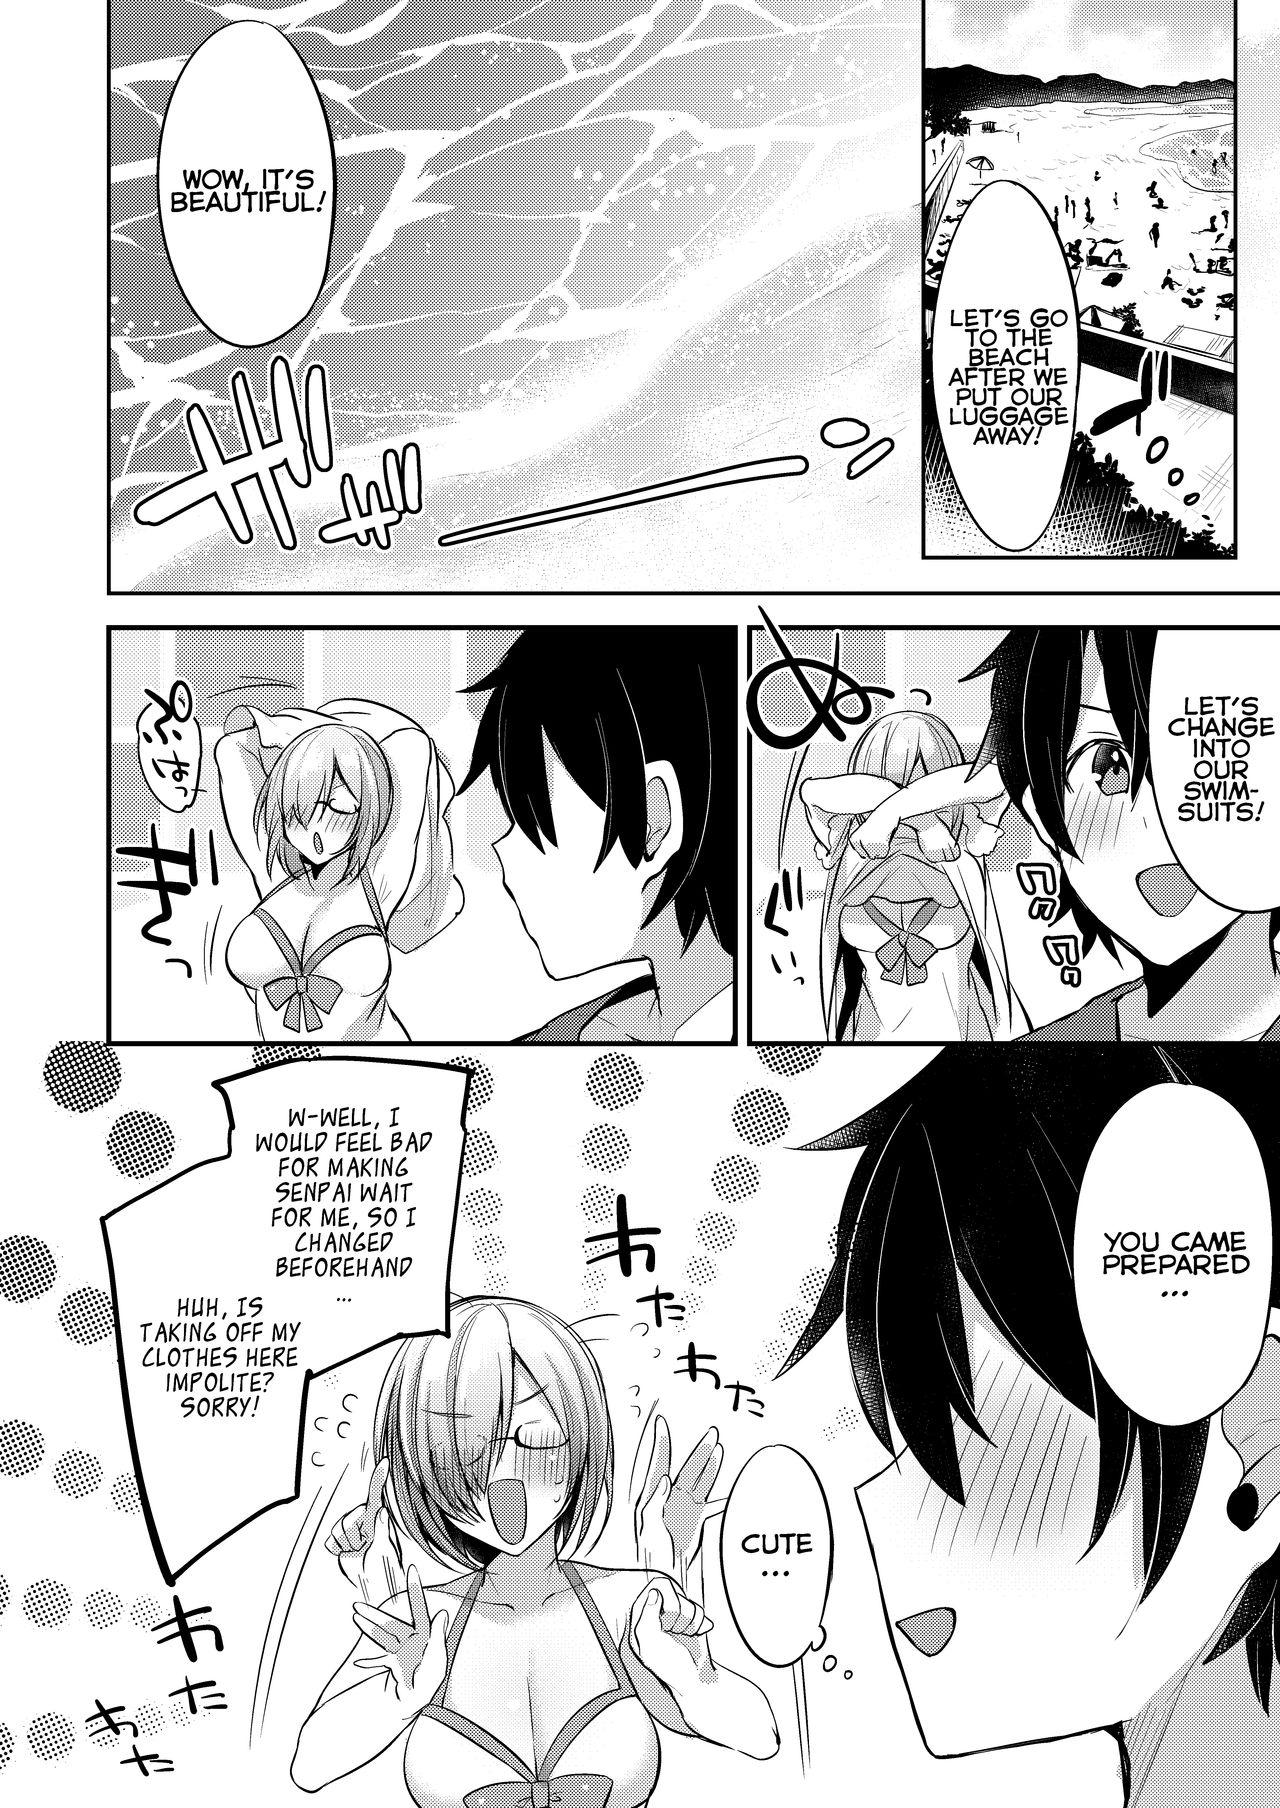 Housewife Marshmallow Vacation - Fate grand order Lesbian Sex - Page 3